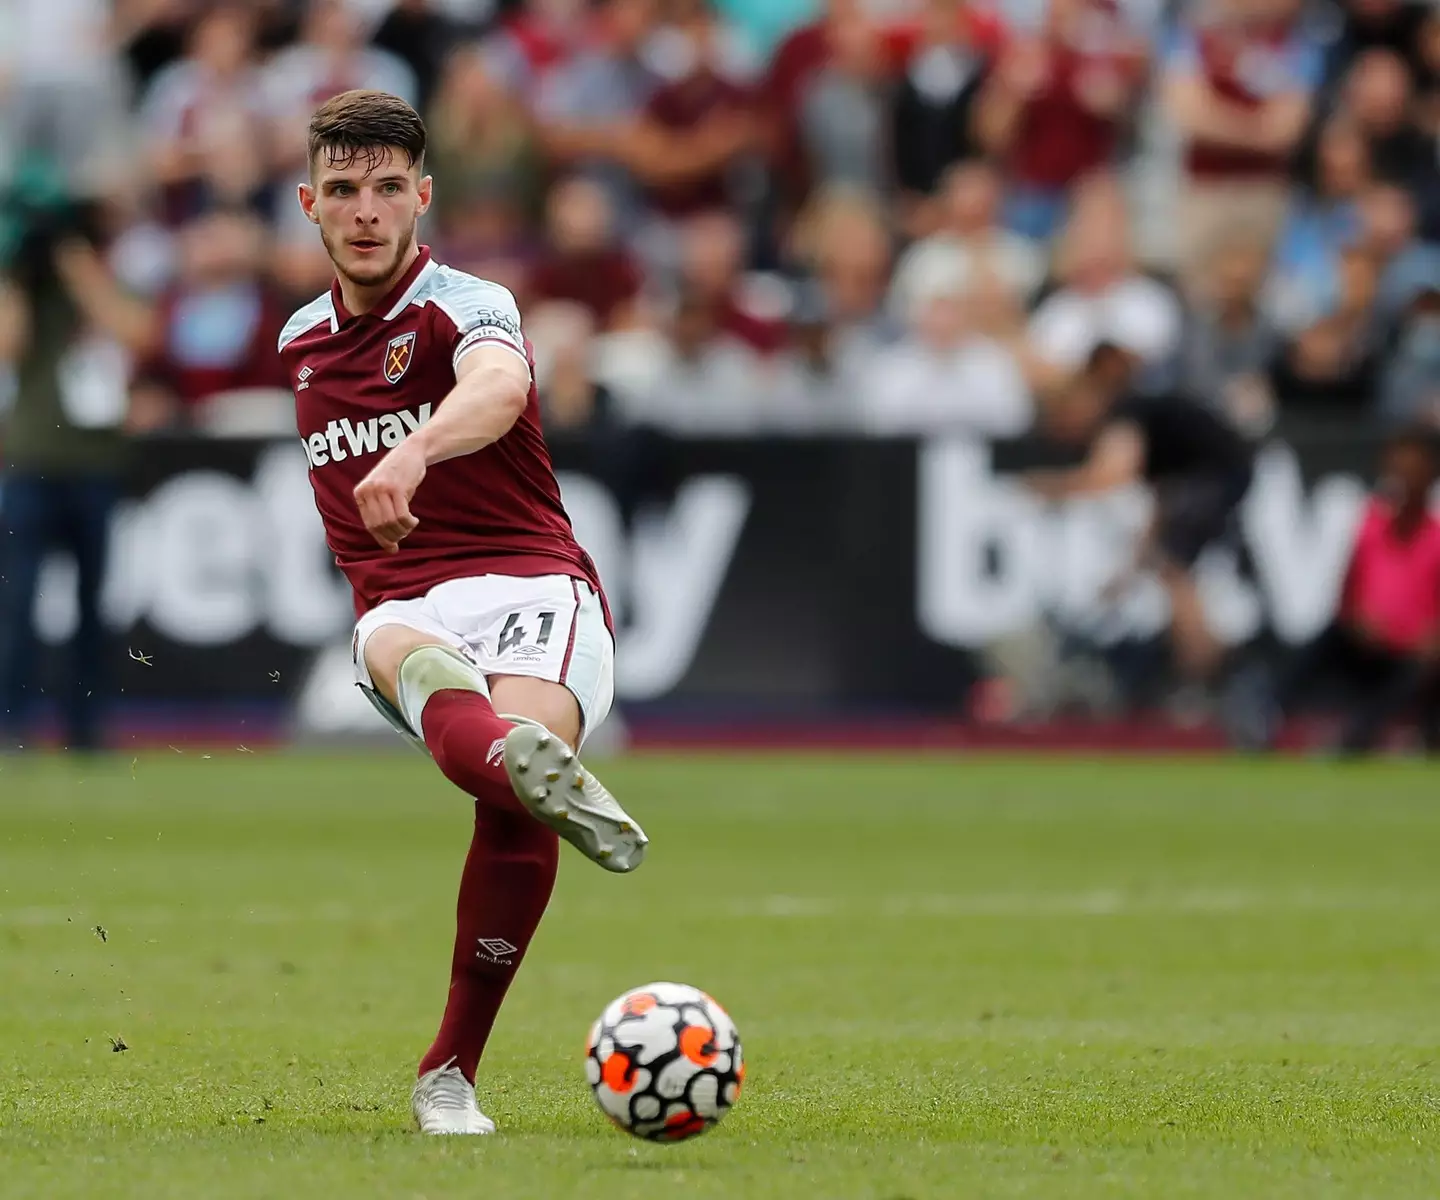 Declan Rice of West Ham United passing the ball into midfield. (Alamy)